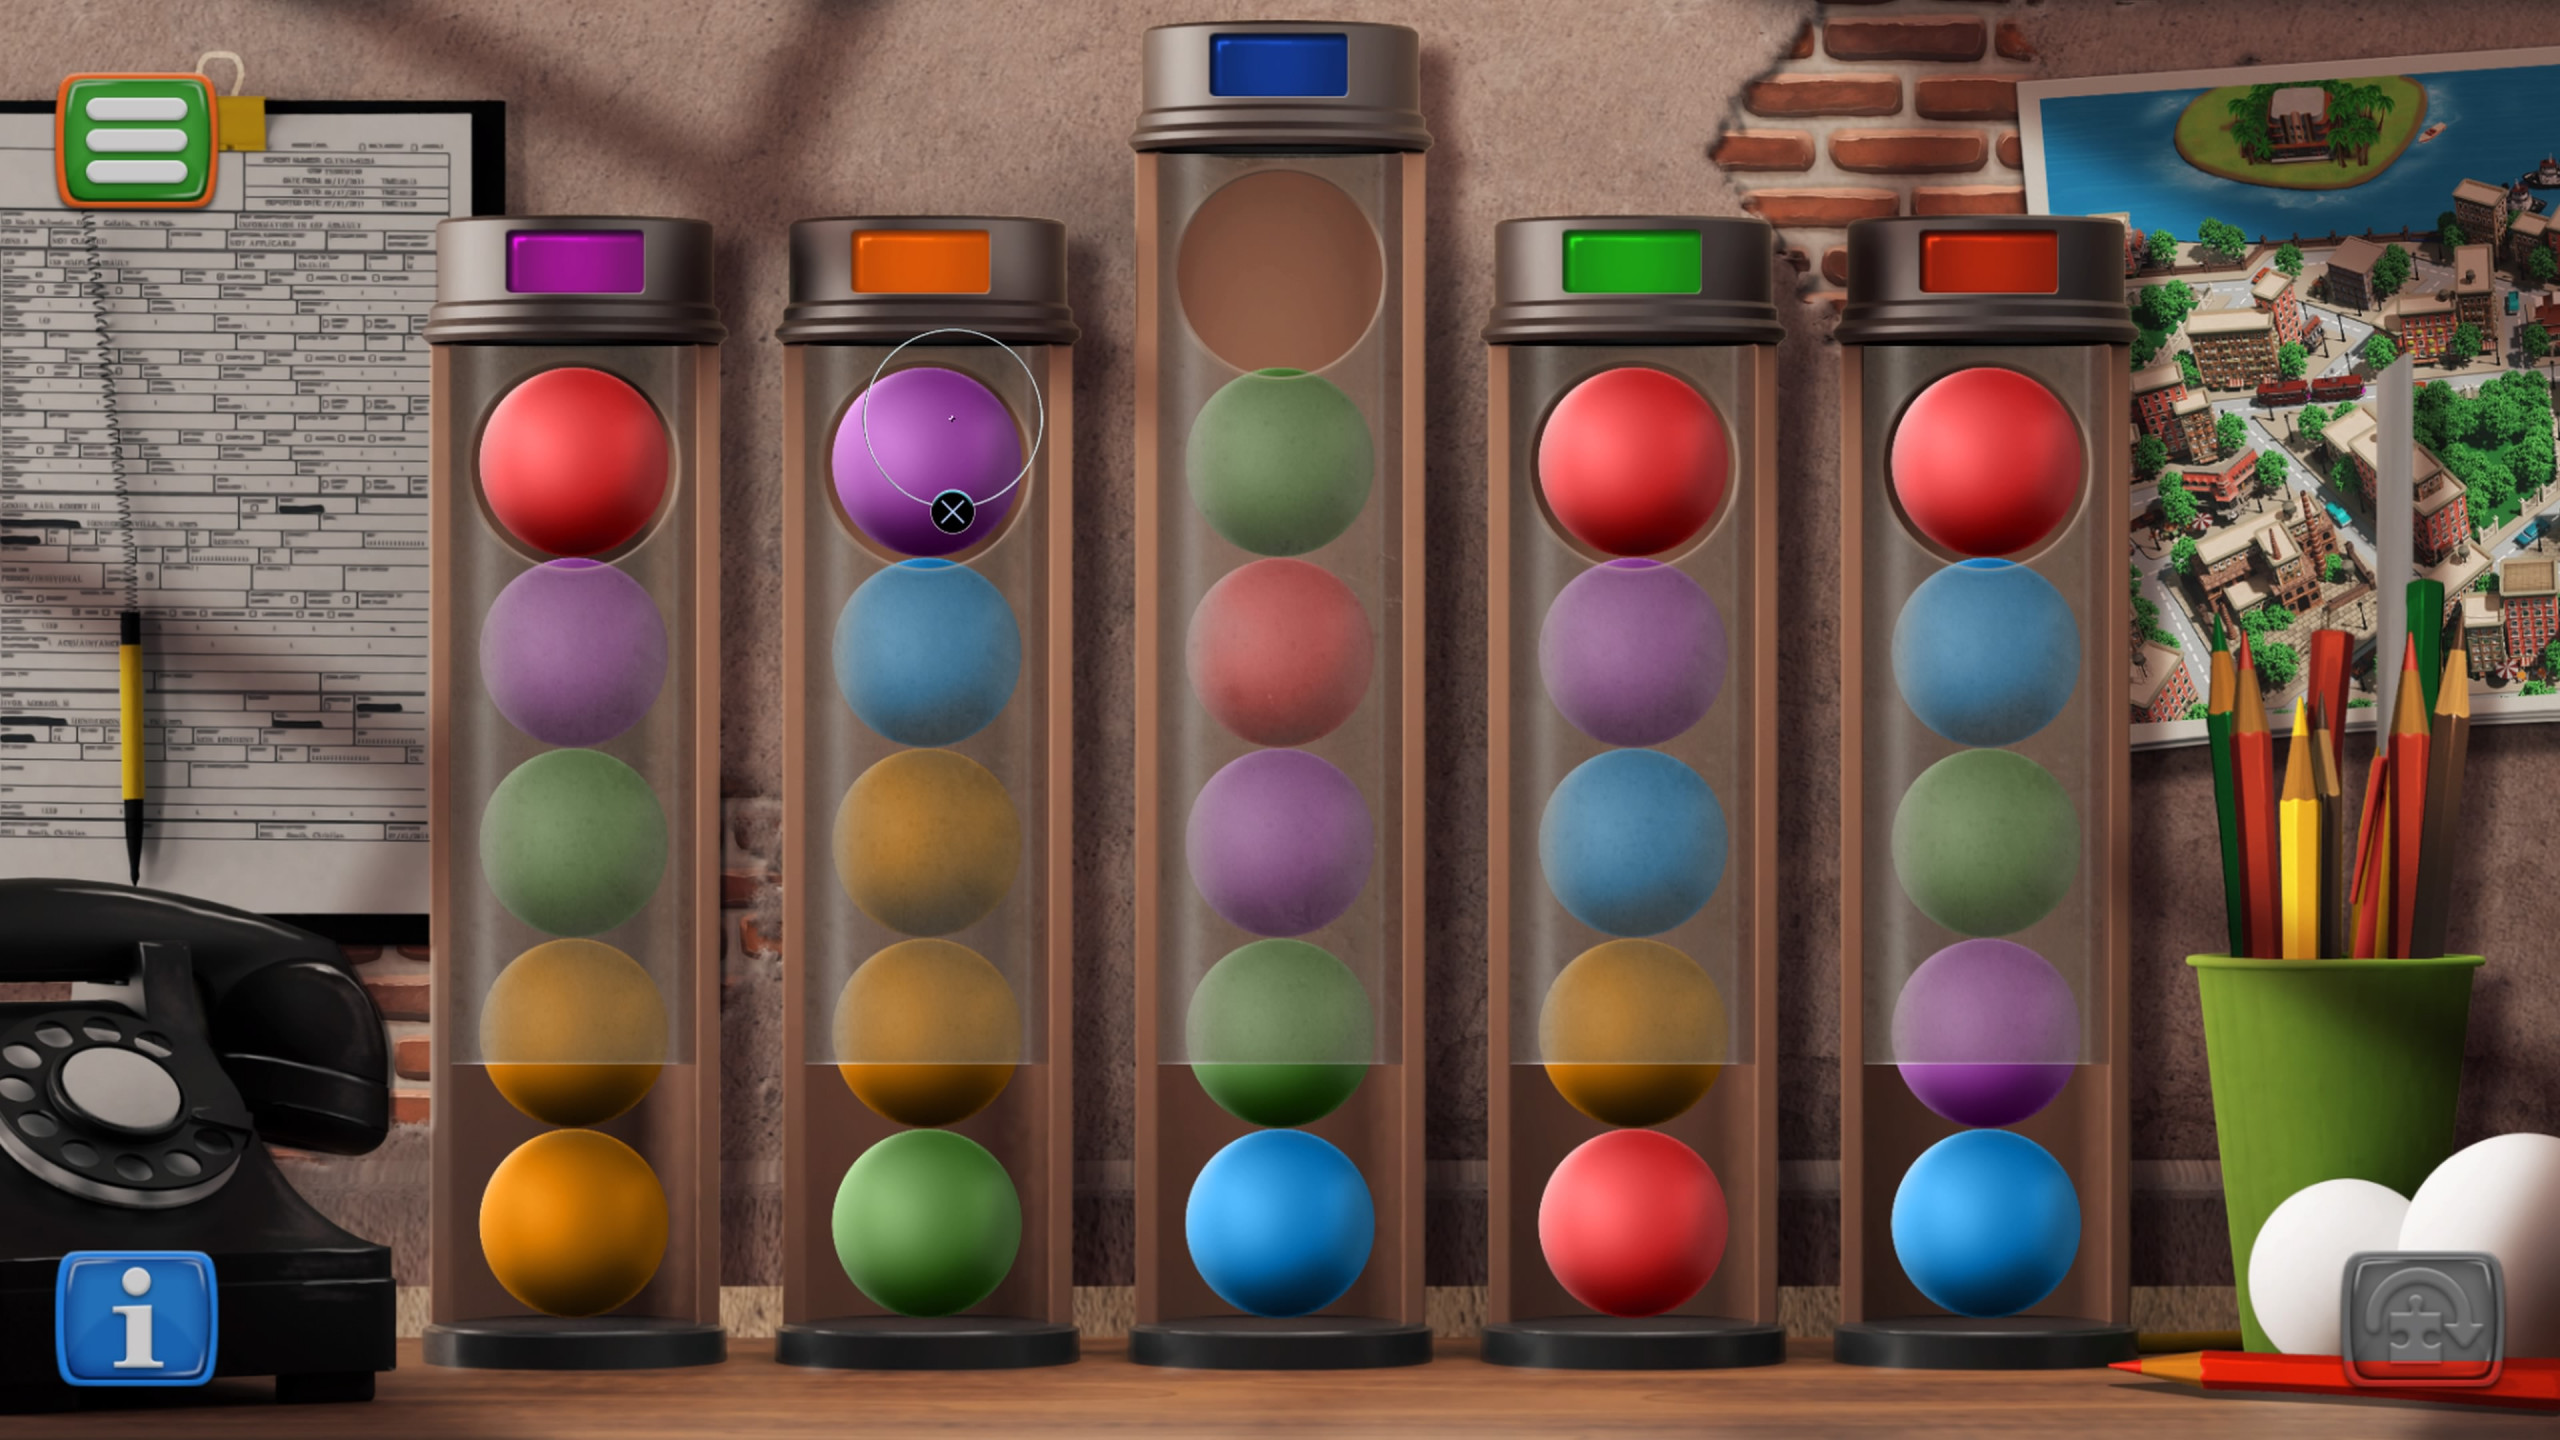 five tubes holding five balls each in various colours. this puzzle requires players to match all the balls in the correct tower.